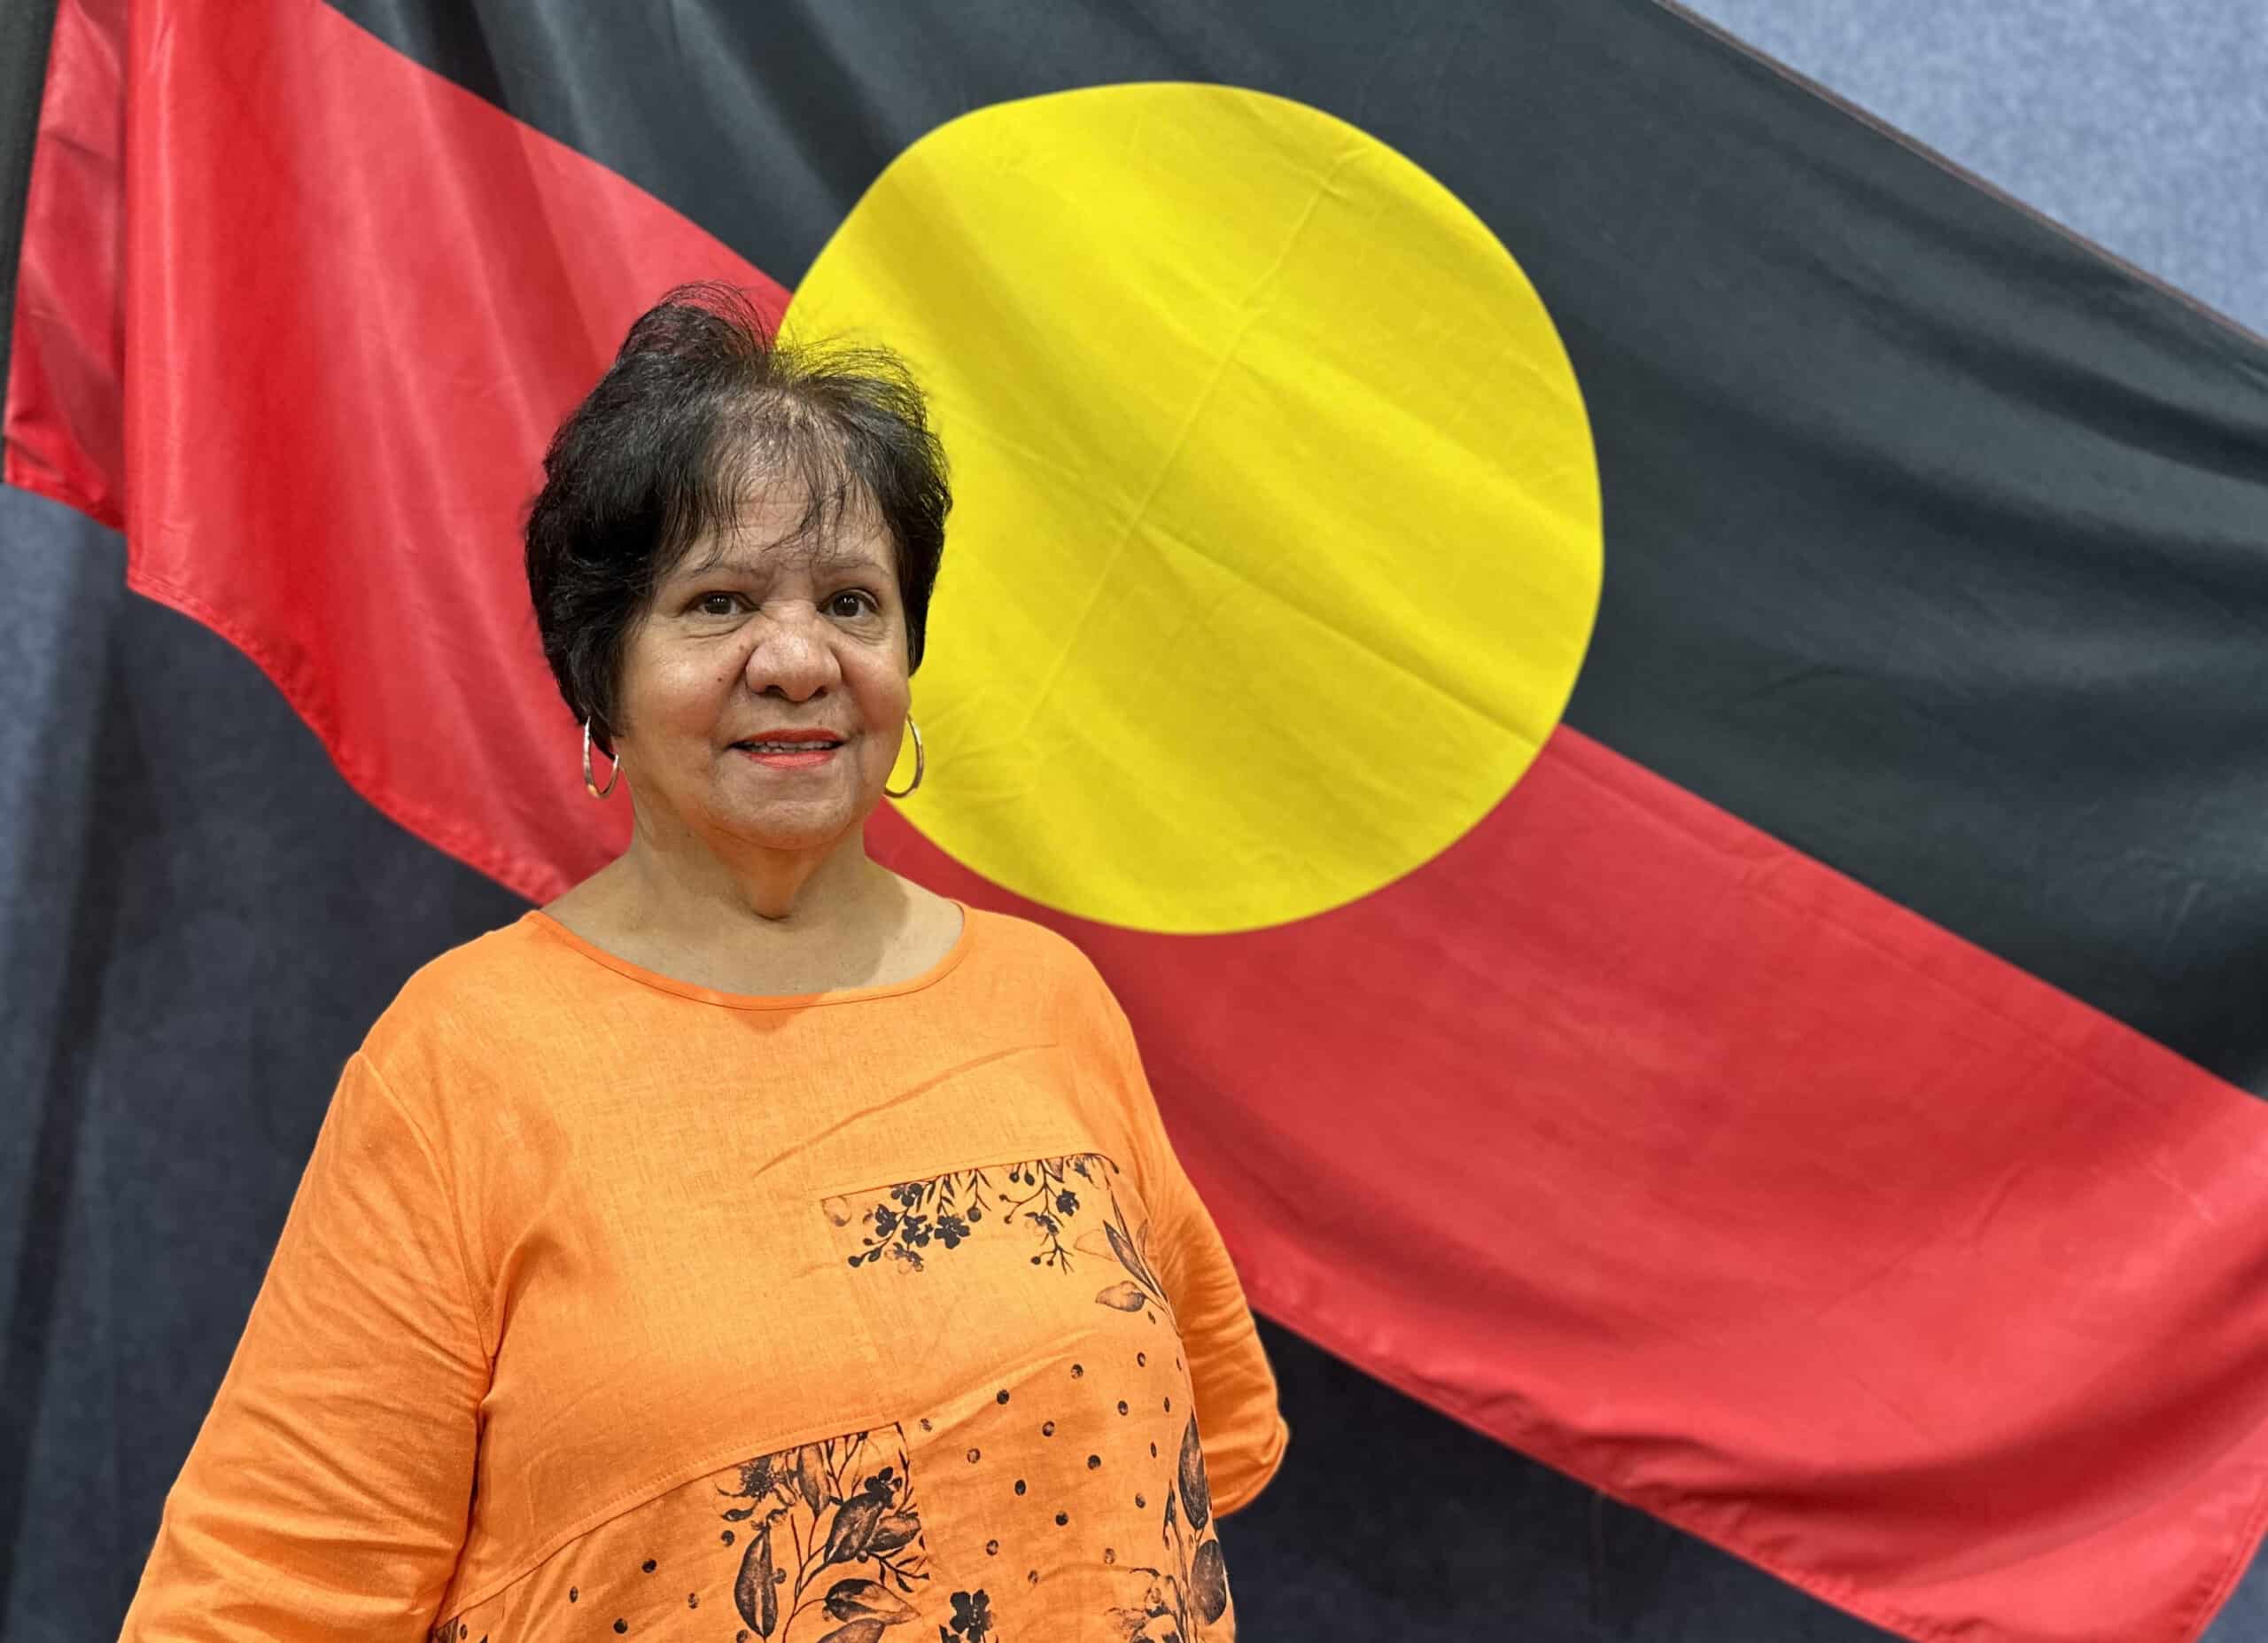 Blackfriars’ Reconciliation Action Plan launched